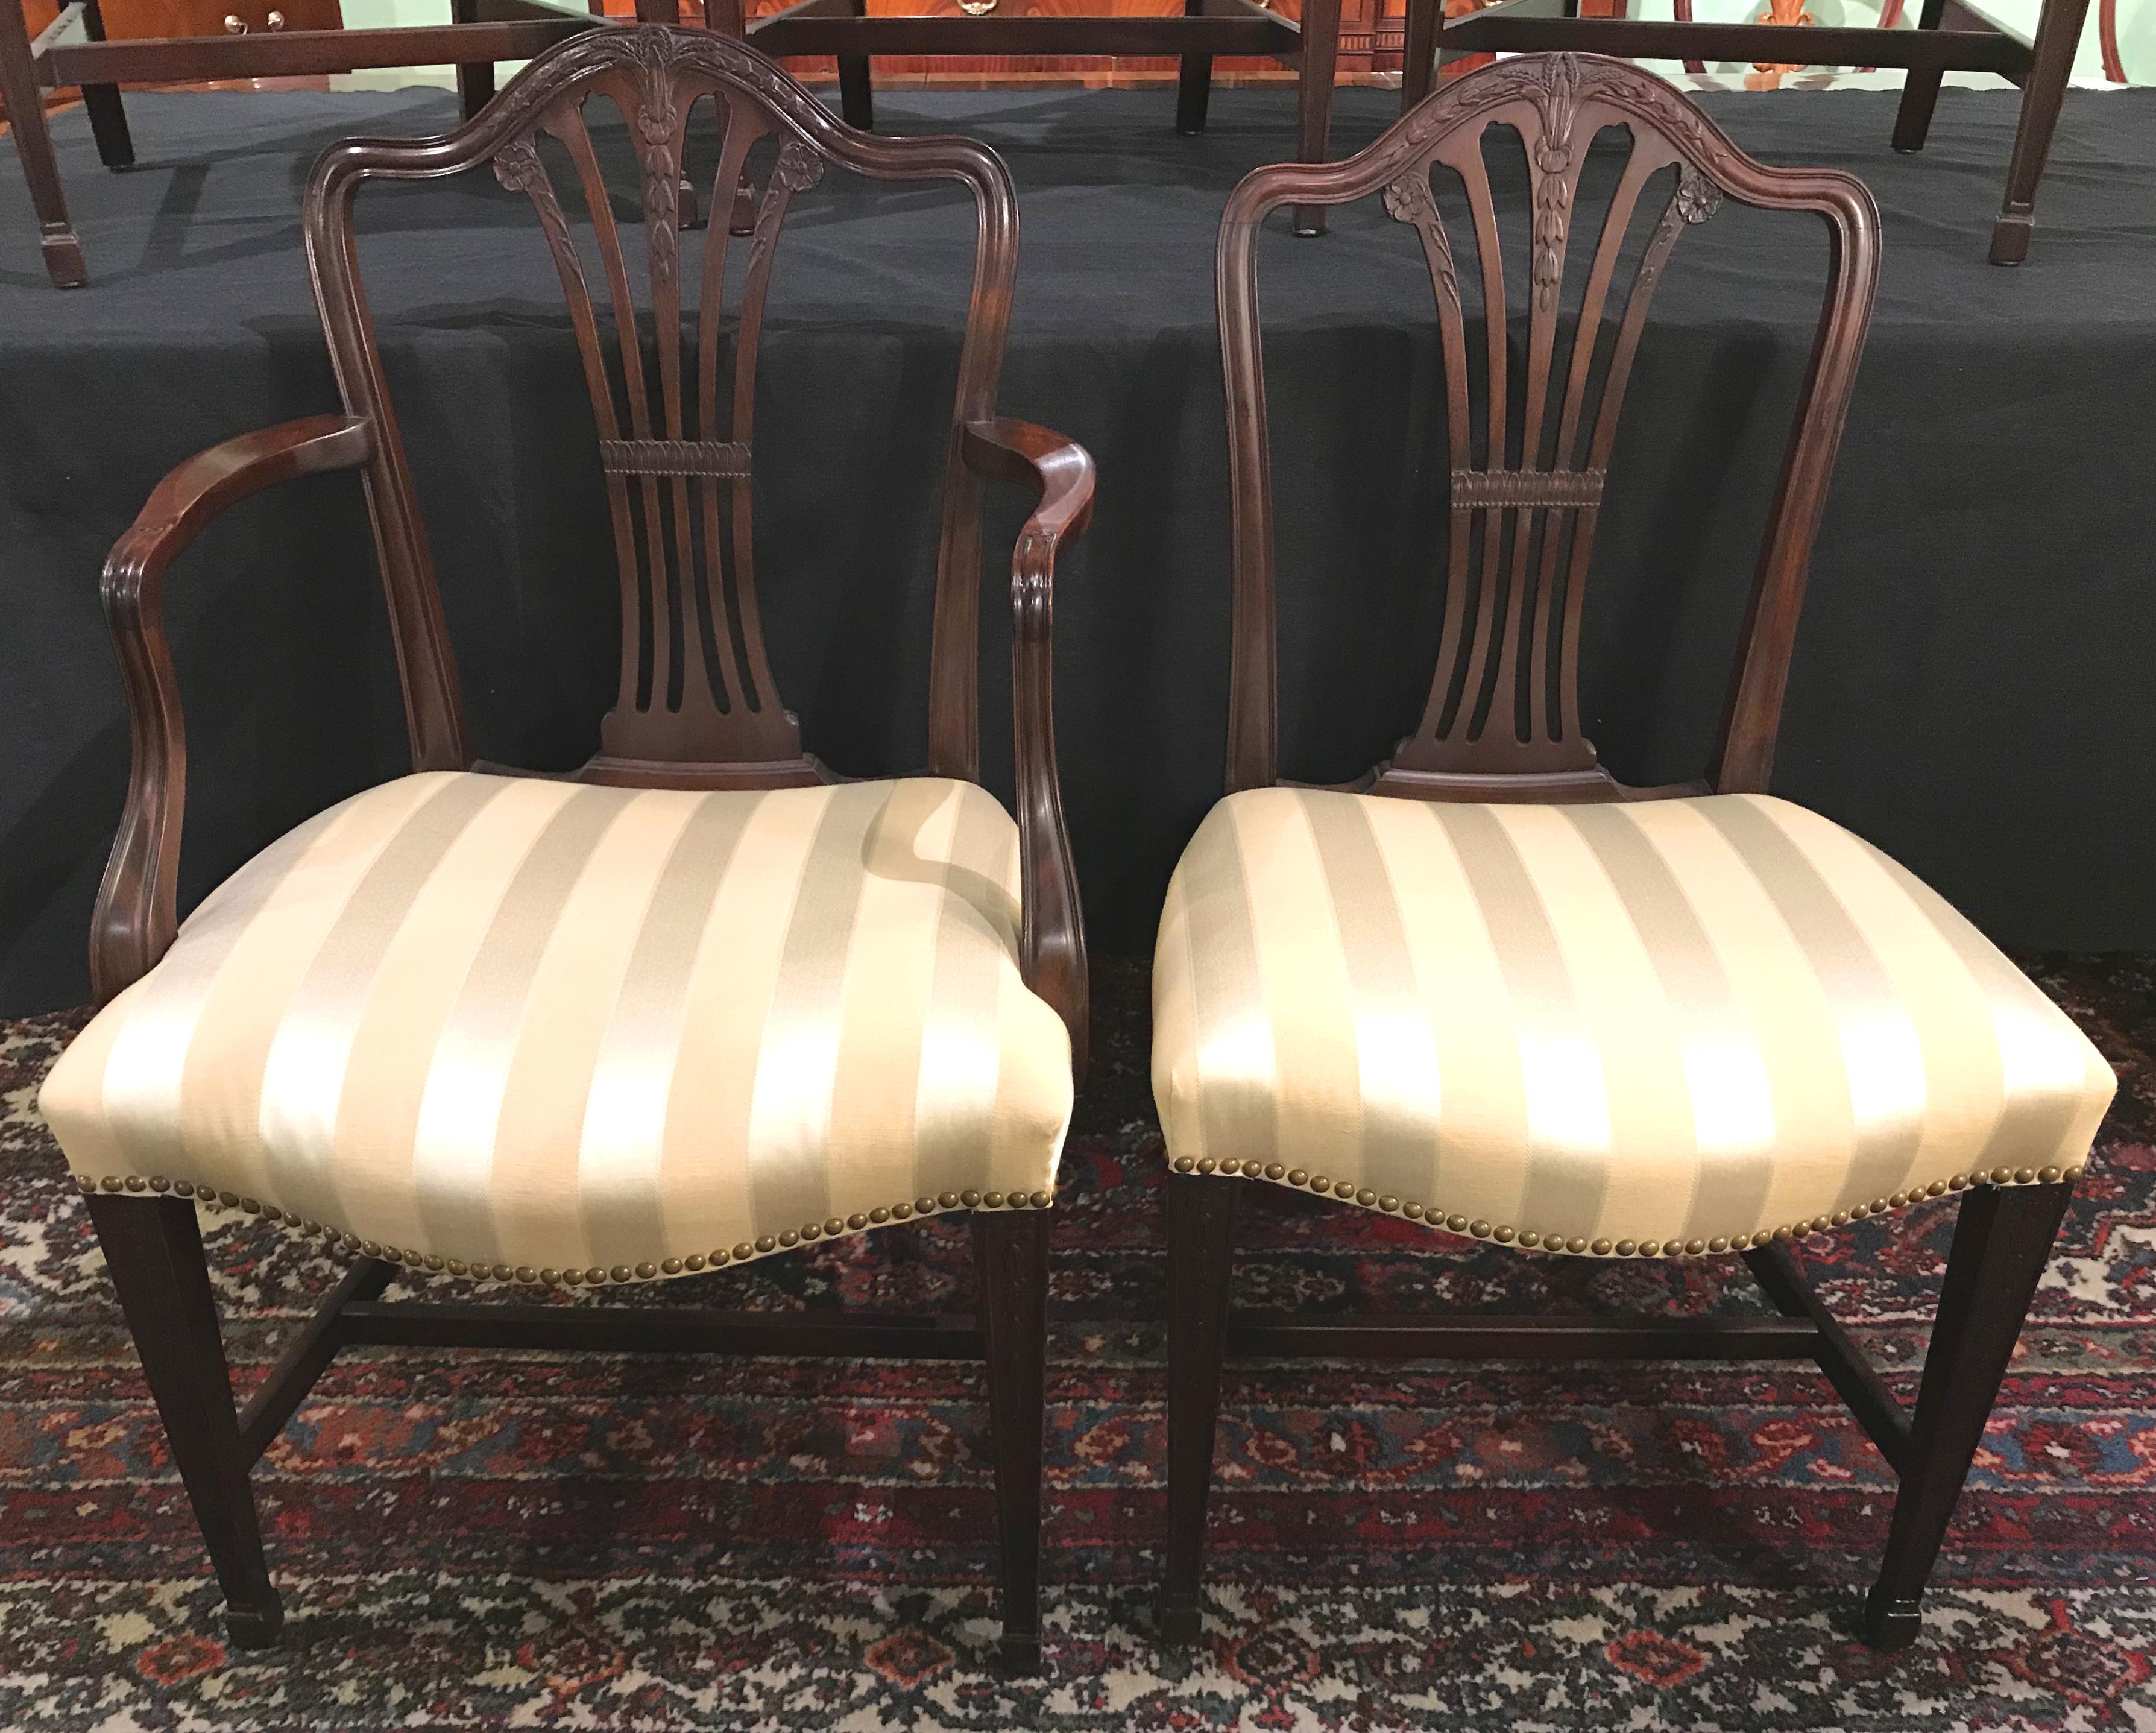 A fine custom set of six solid carved mahogany dining chairs, consisting of two armchairs and four side chairs, with bellflower carved decoration and striped satin upholstery, in very good overall condition, with minor imperfections and expected